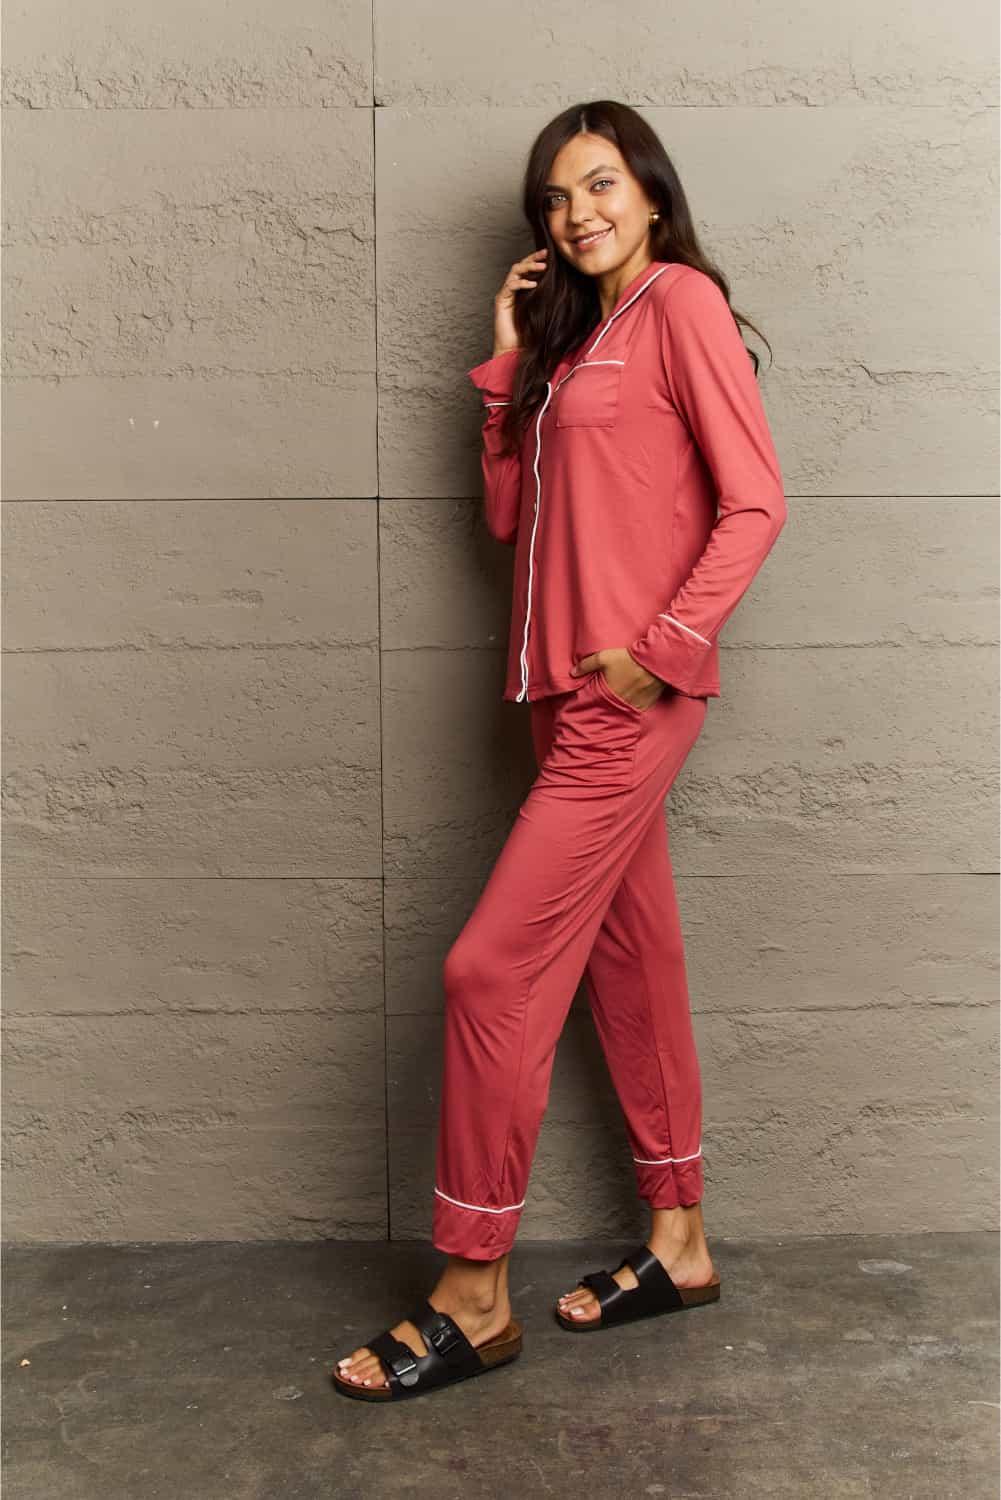 Ninexis Buttoned Collared Neck Top and Pants Pajama Set - Lab Fashion, Home & Health